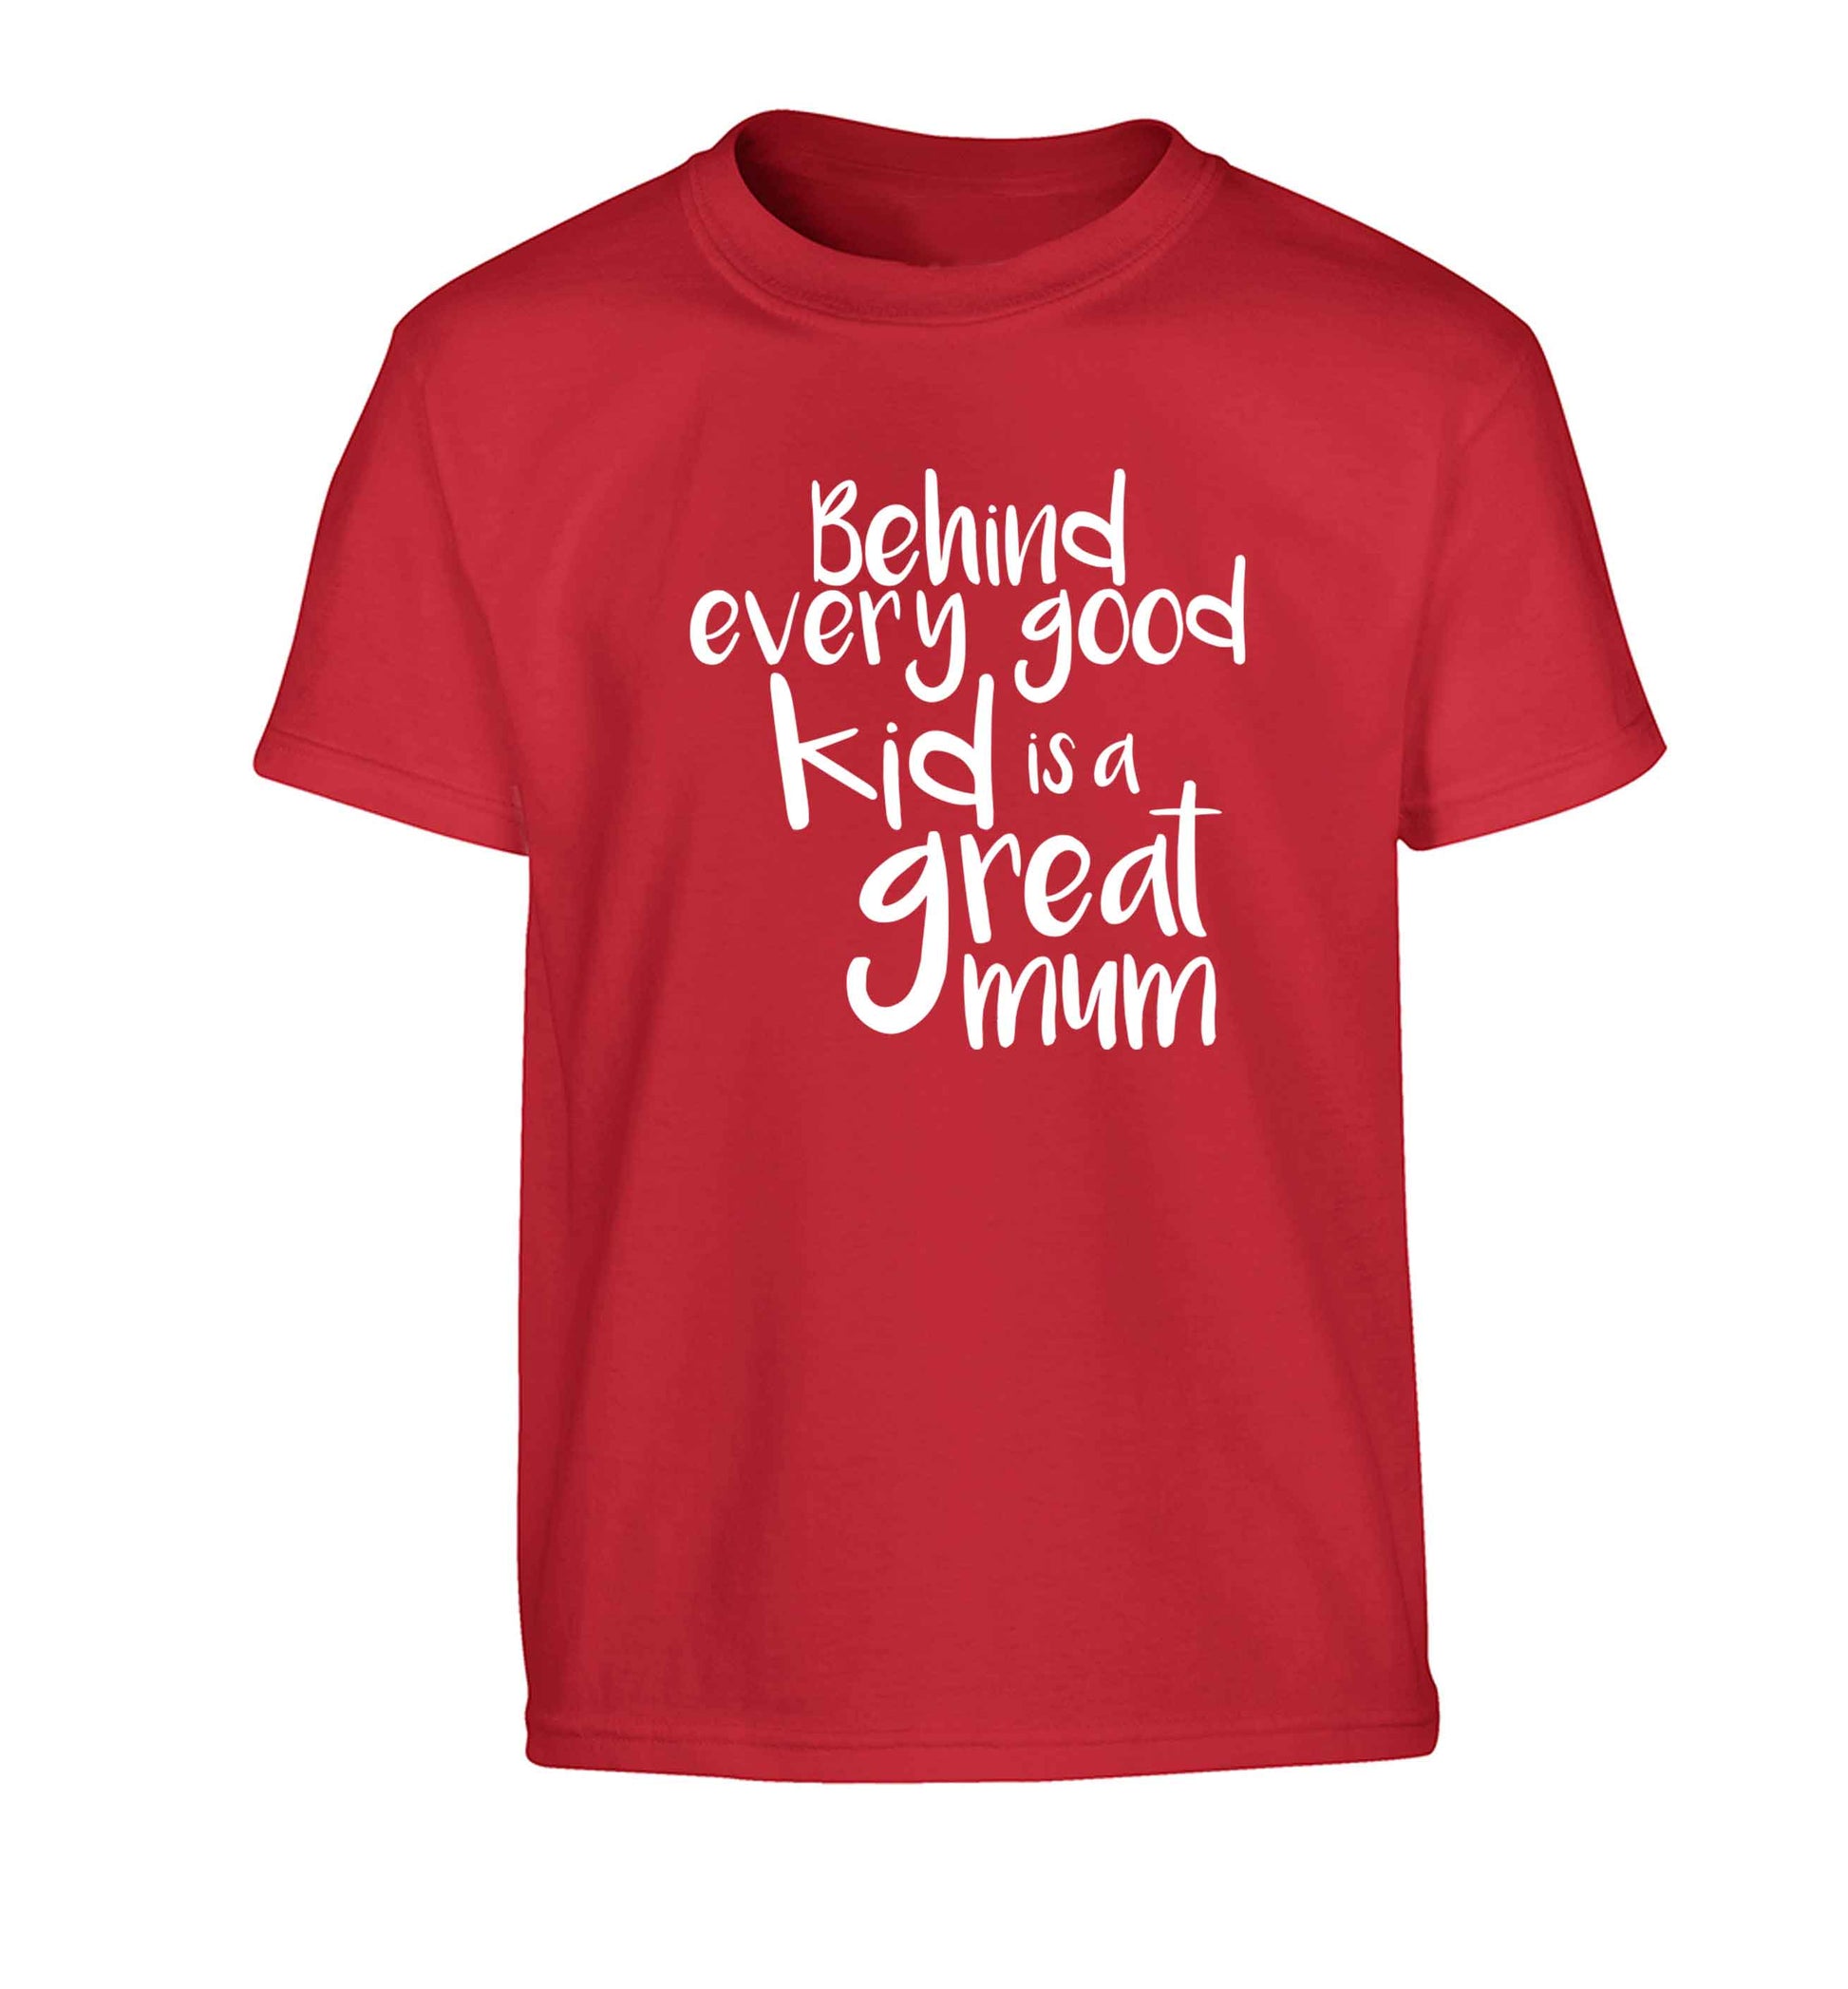 Behind every good kid is a great mum Children's red Tshirt 12-13 Years